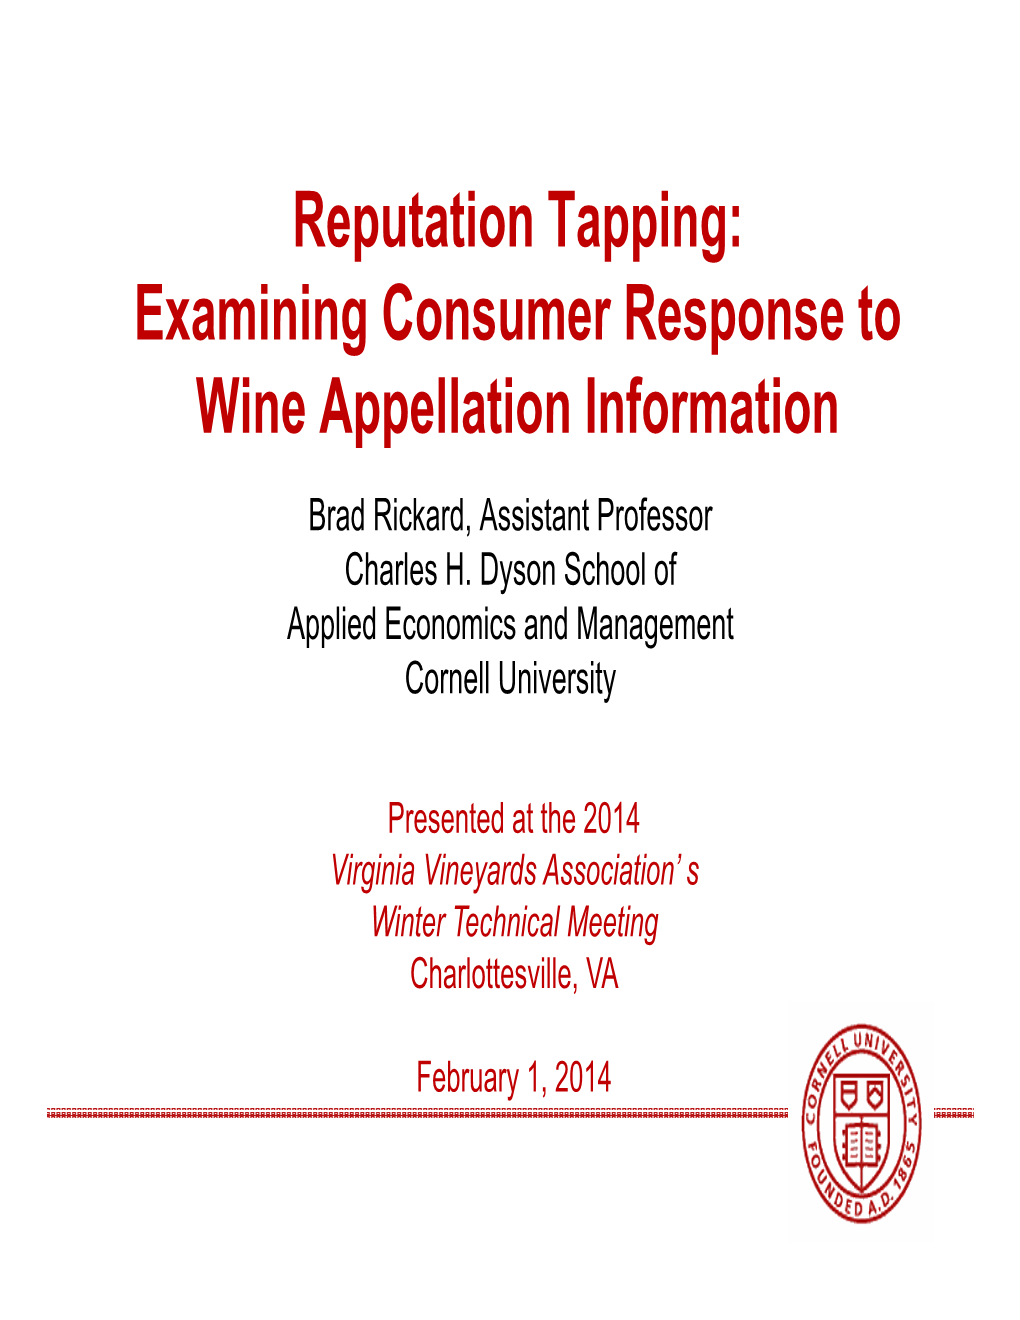 Reputation Tapping: Examining Consumer Response to Wine Appellation Information